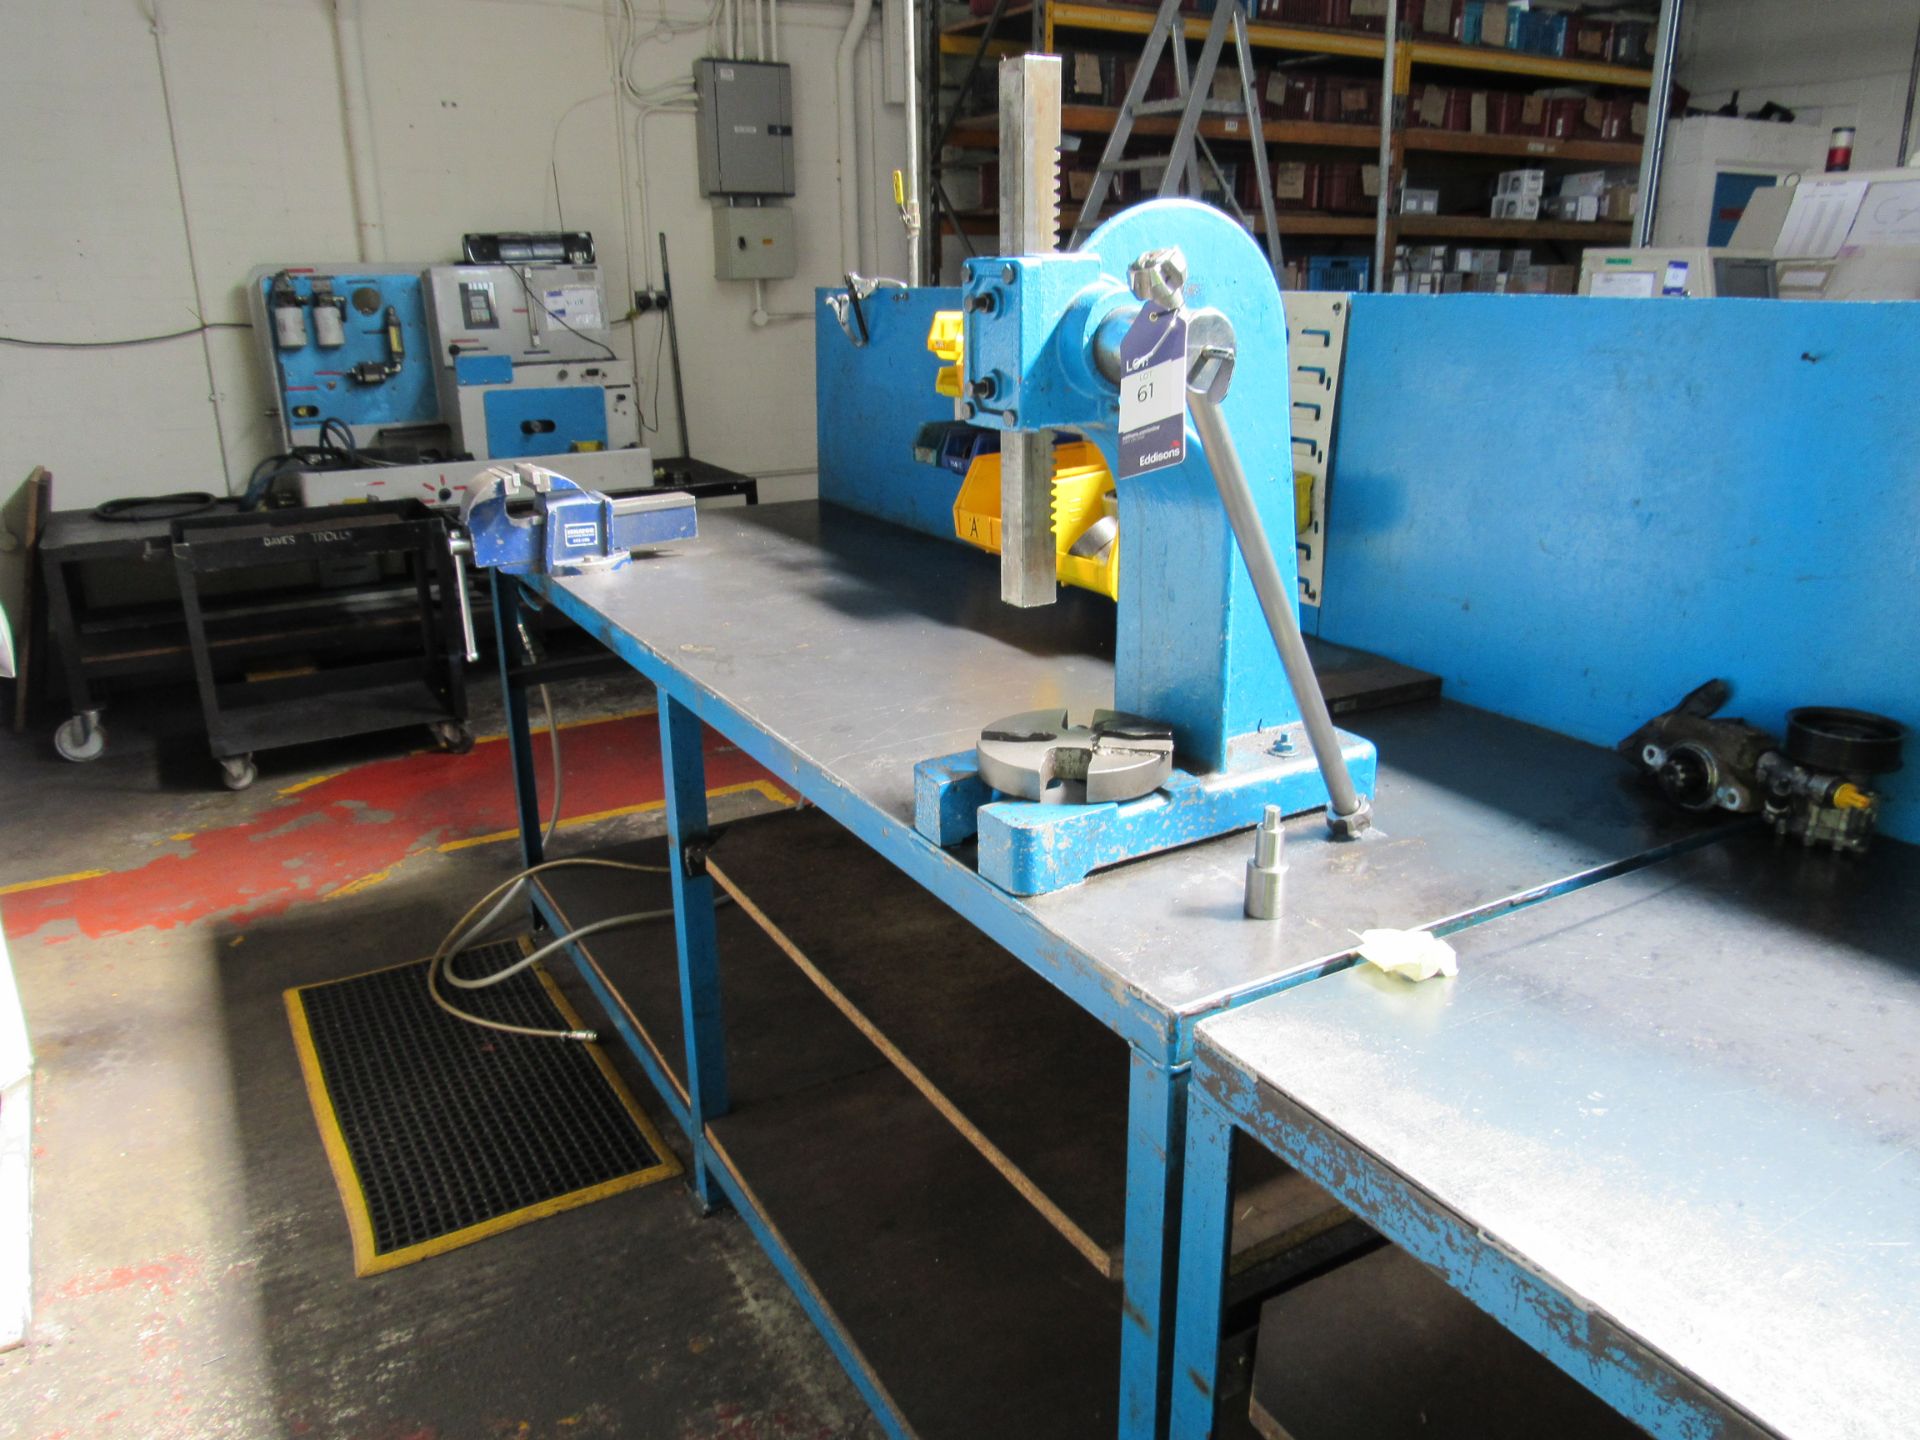 Workbench with geared press and senator 44-106 vic